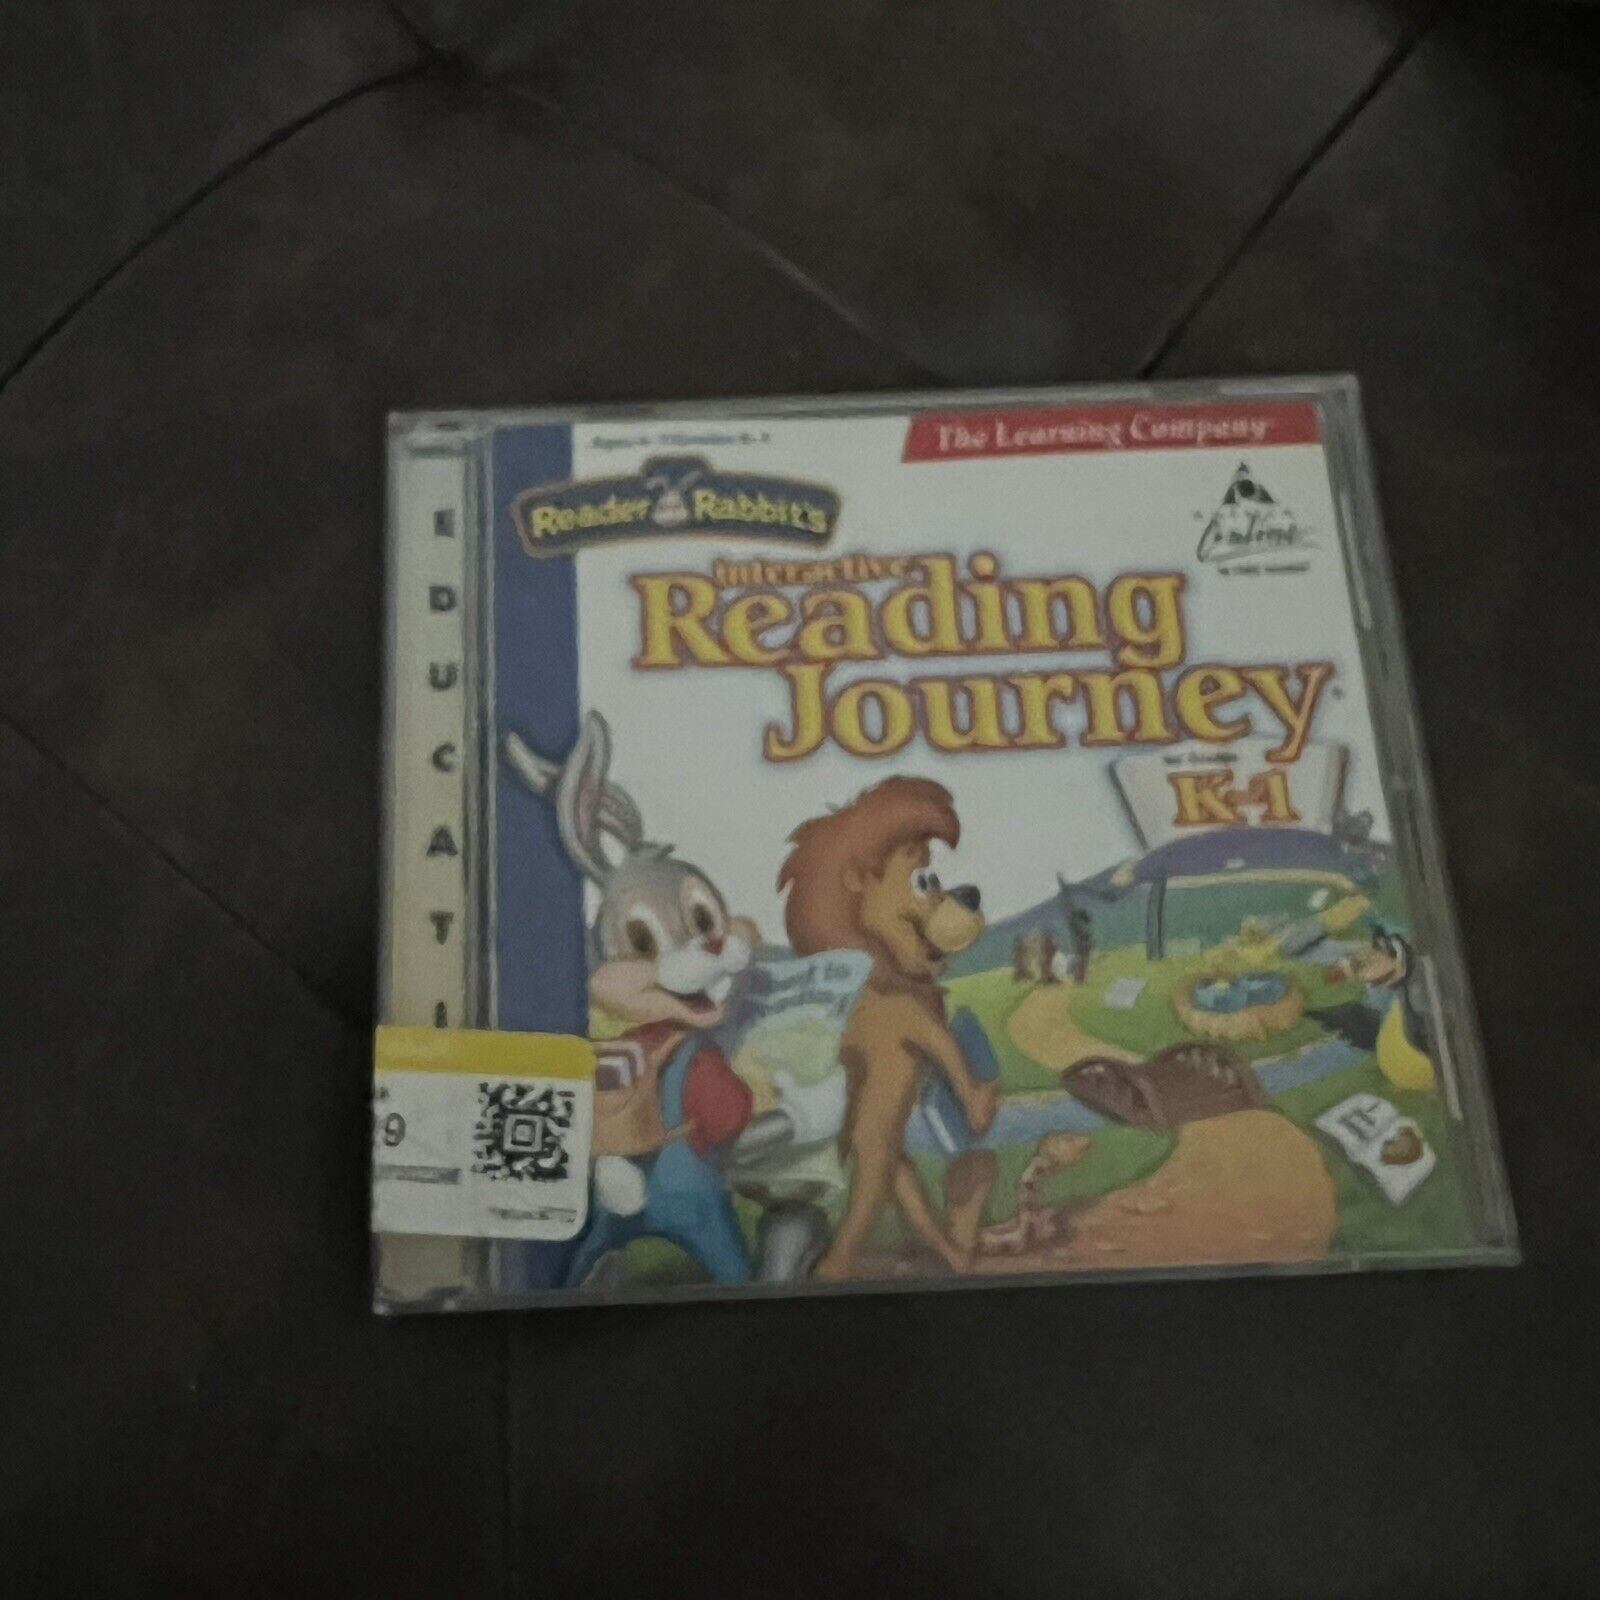 Reader Rabbit Interactive Reading Journey For Grades K-1 PC CD learn words game